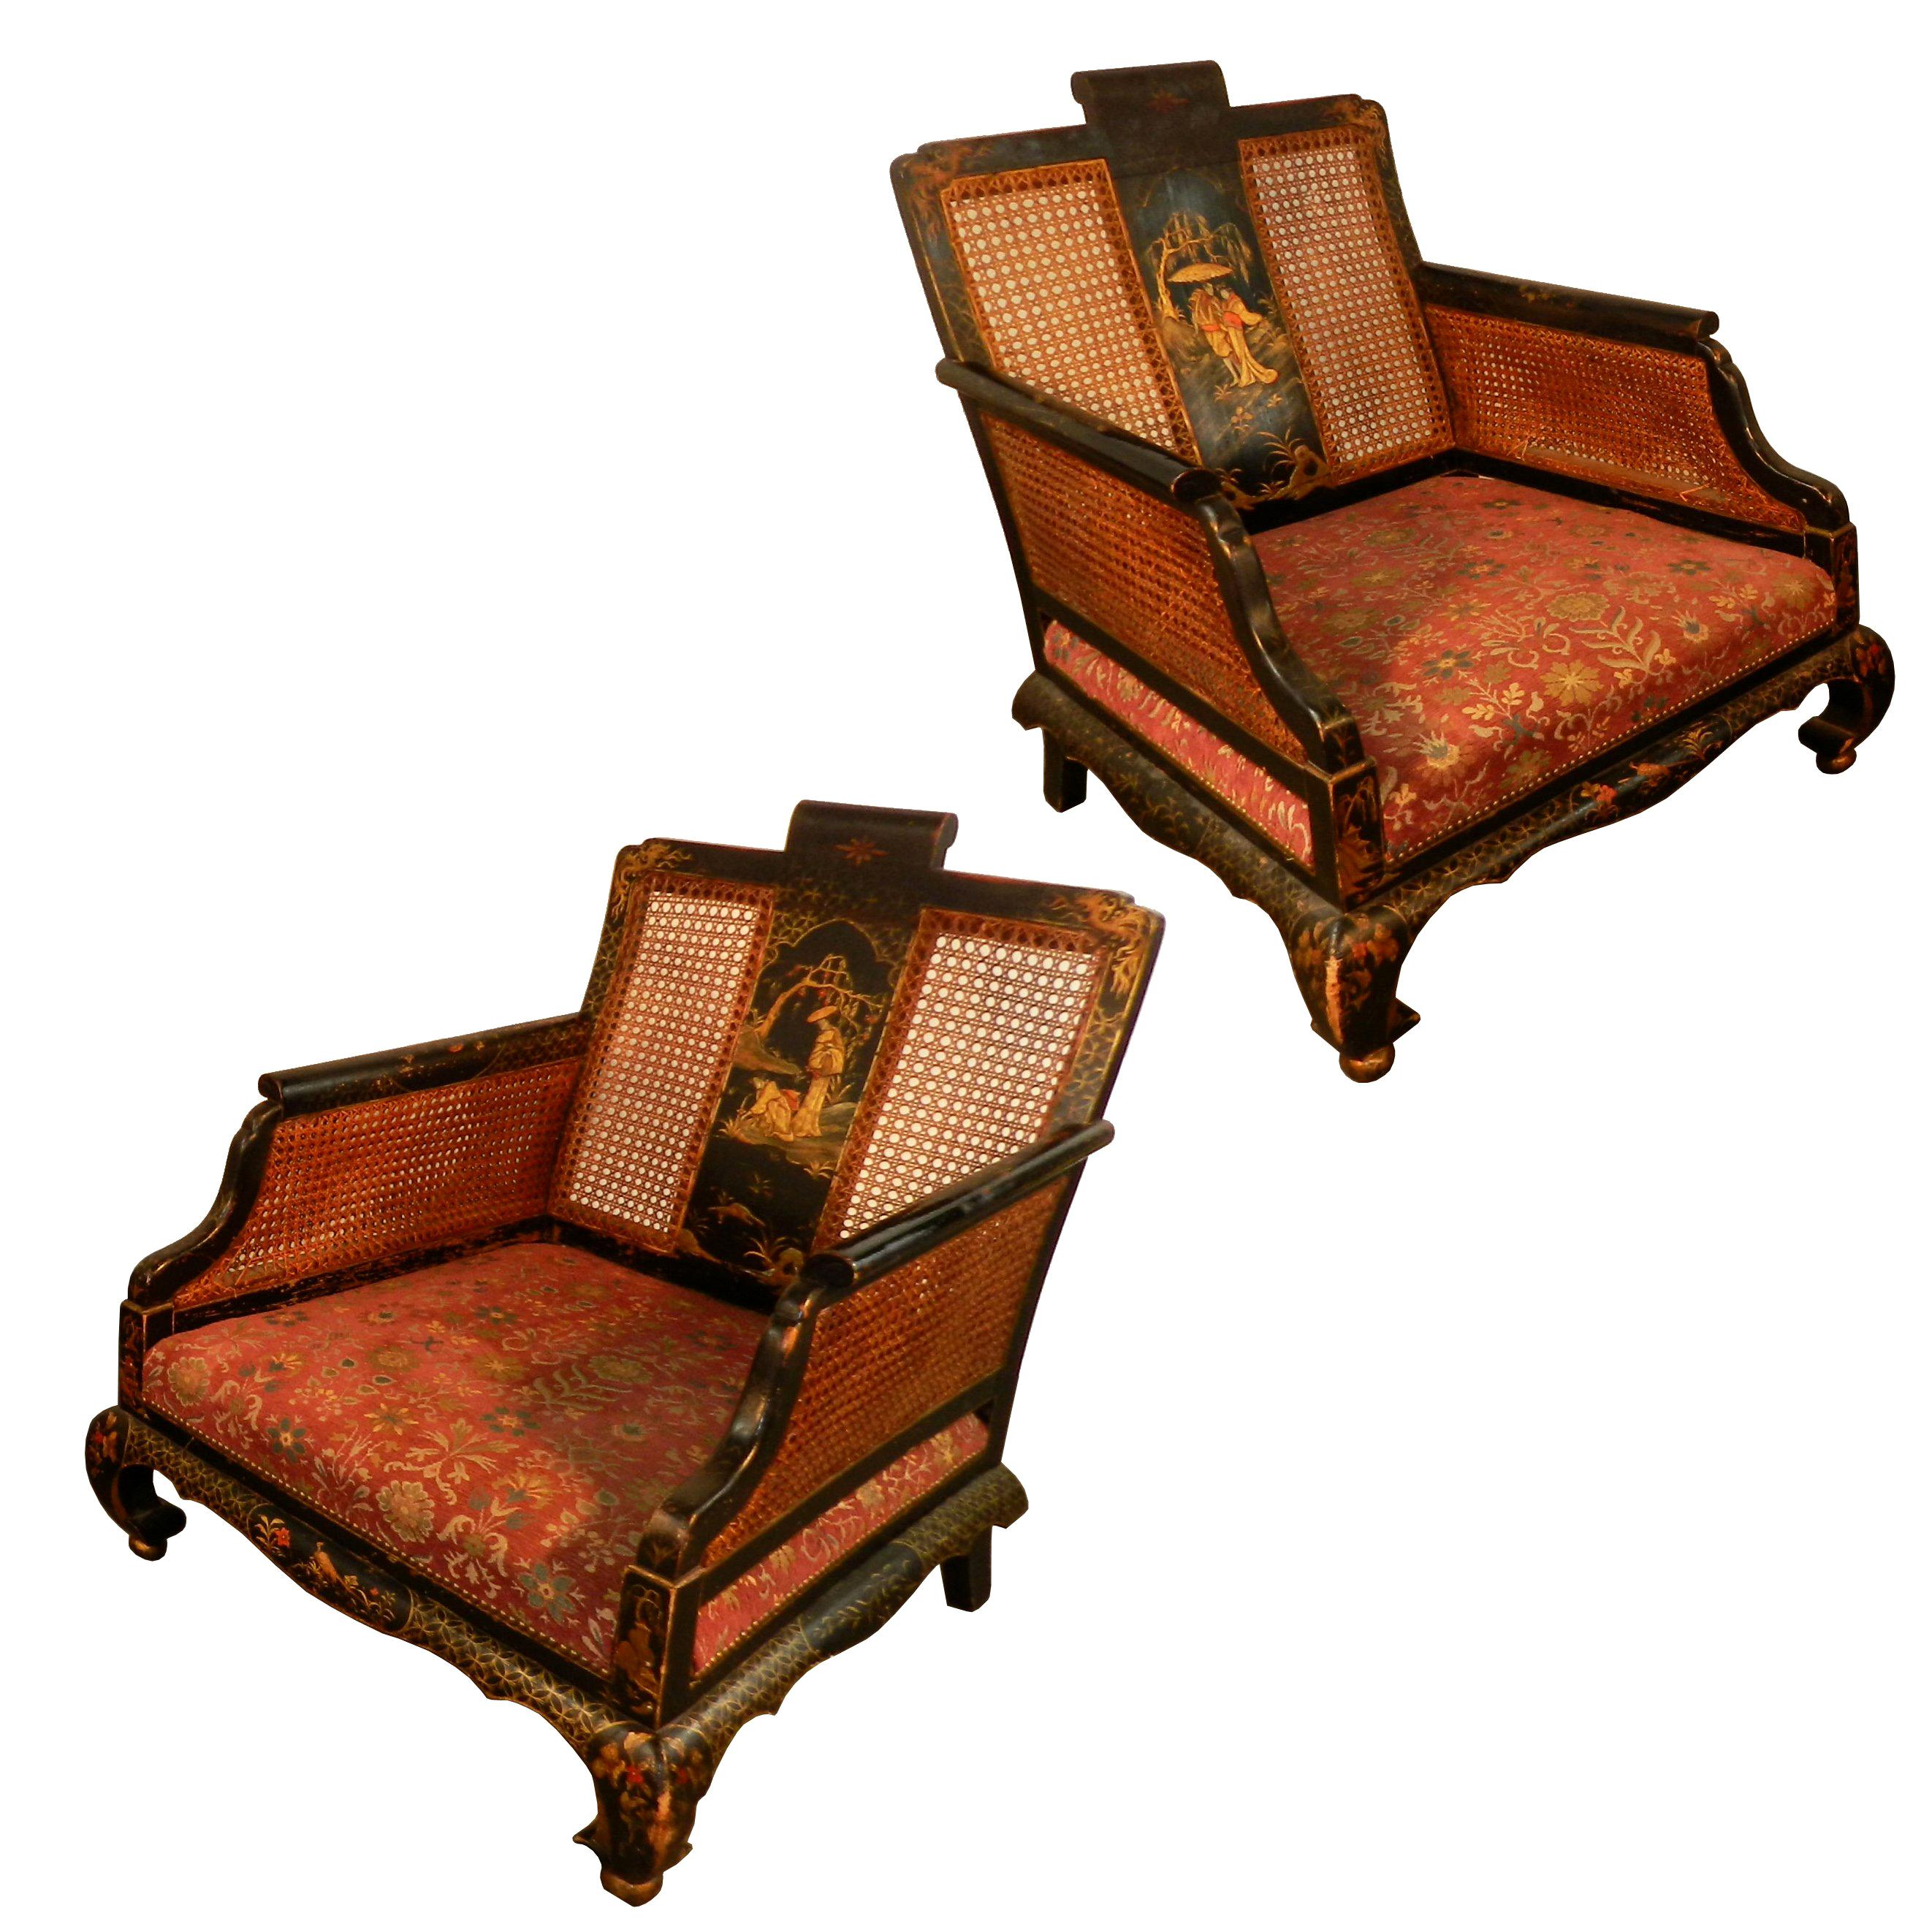 Pair of Lacquered Wood Armchairs, China, 19th Century